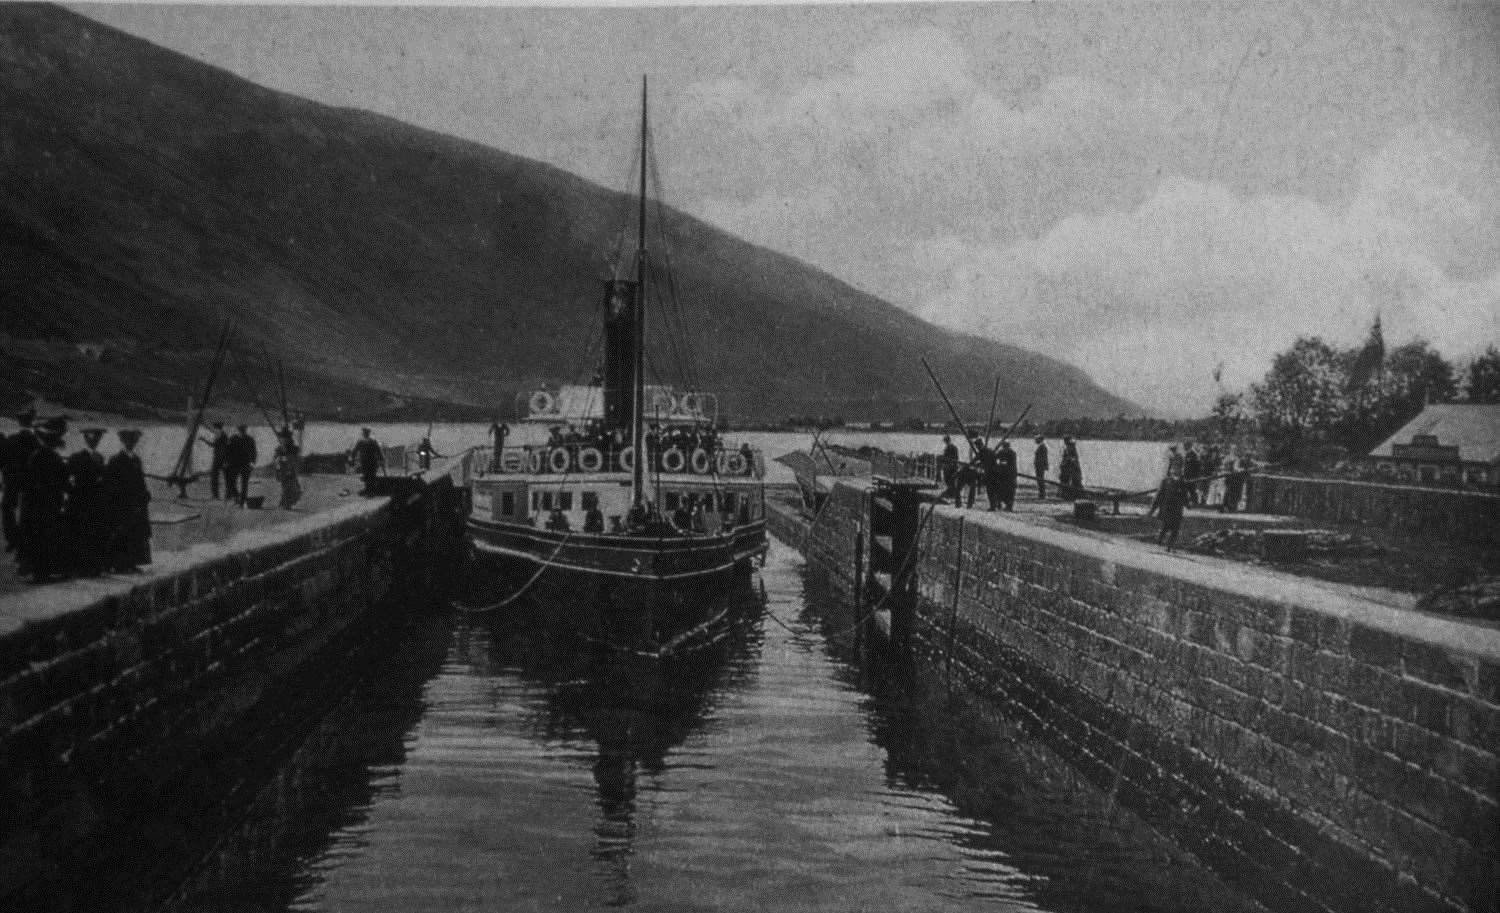 Caledonian Canal is 200 years old.